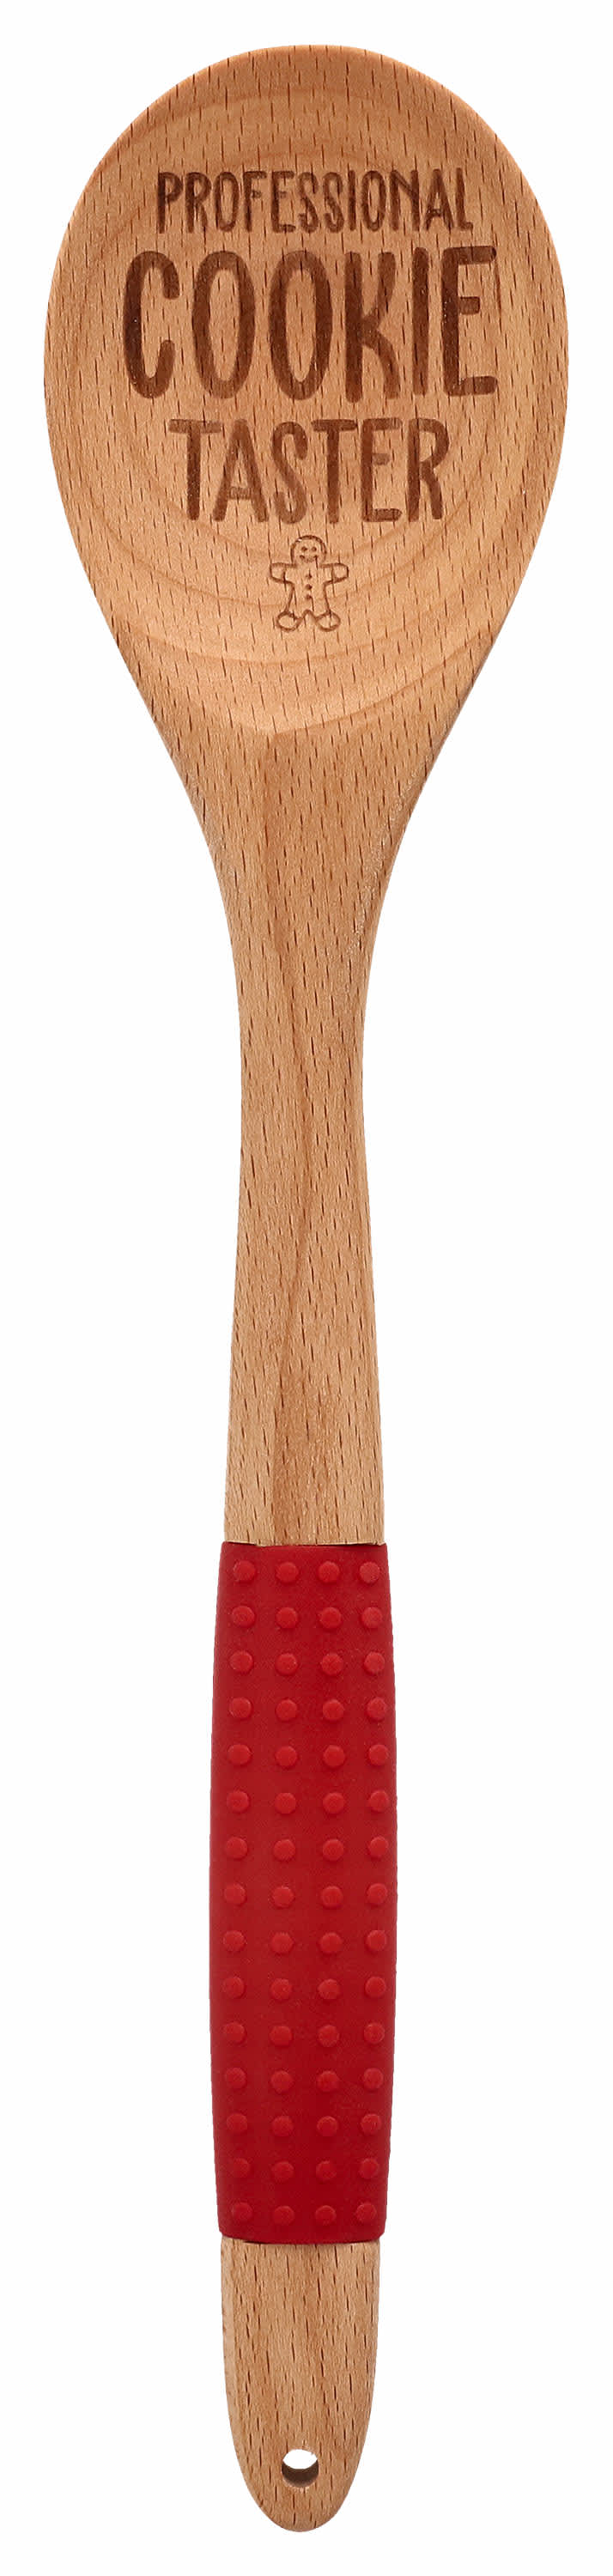 Bass Pro Shops® Professional Cookie Taster Wooden Spoon